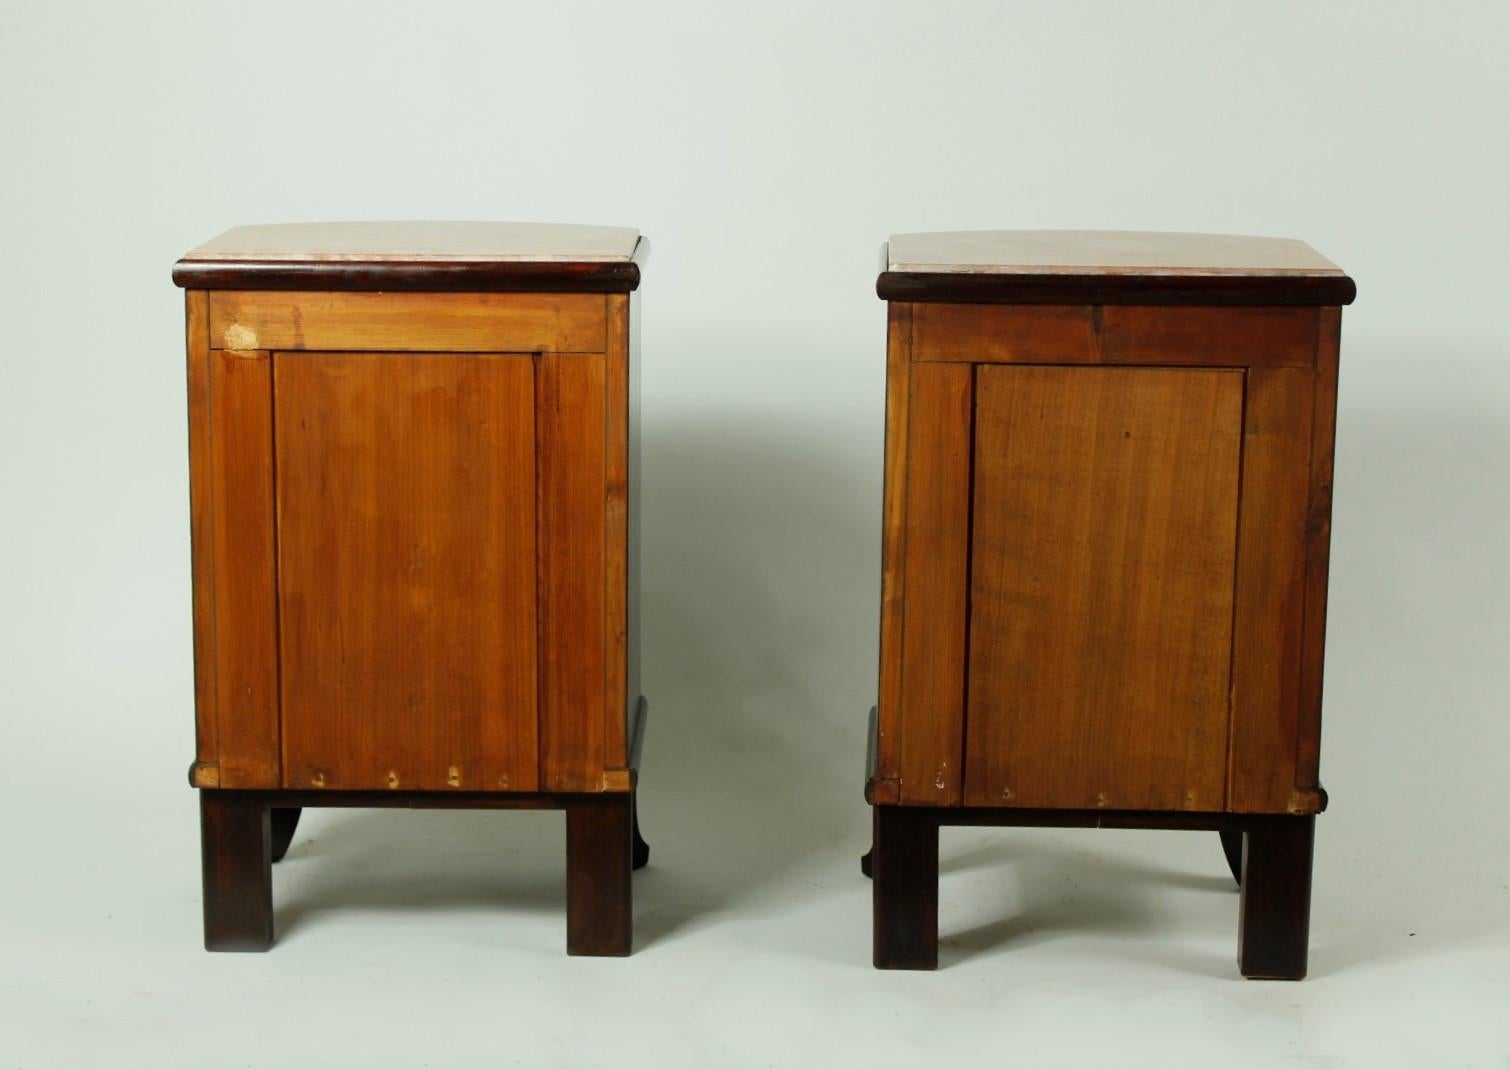 Pair of Antique Walnut and Mahogany Night Stands with Marble Top, 1920s For Sale 3